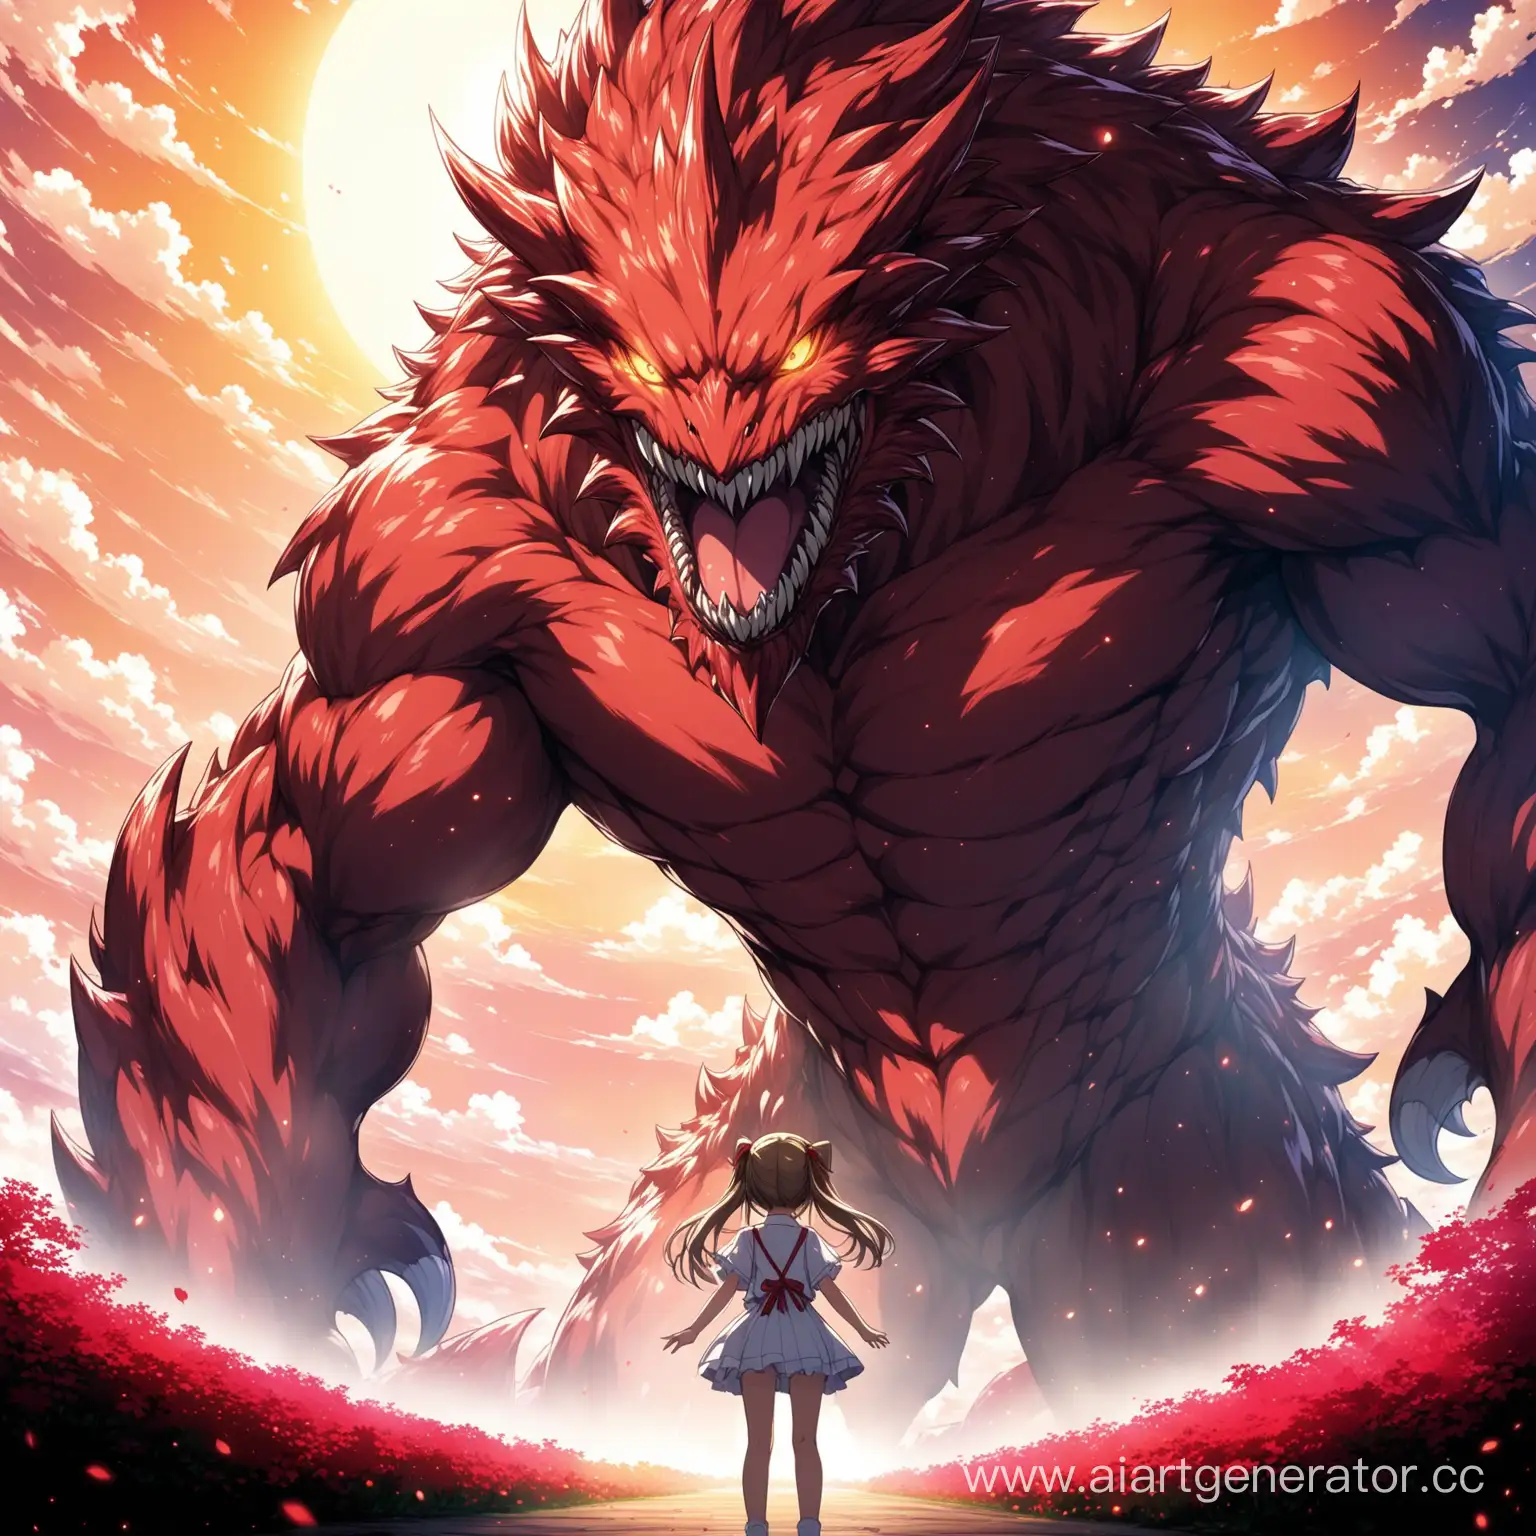 Anime-Loli-Character-Behind-Enormous-Monster-with-Beautiful-Girl-in-Foreground